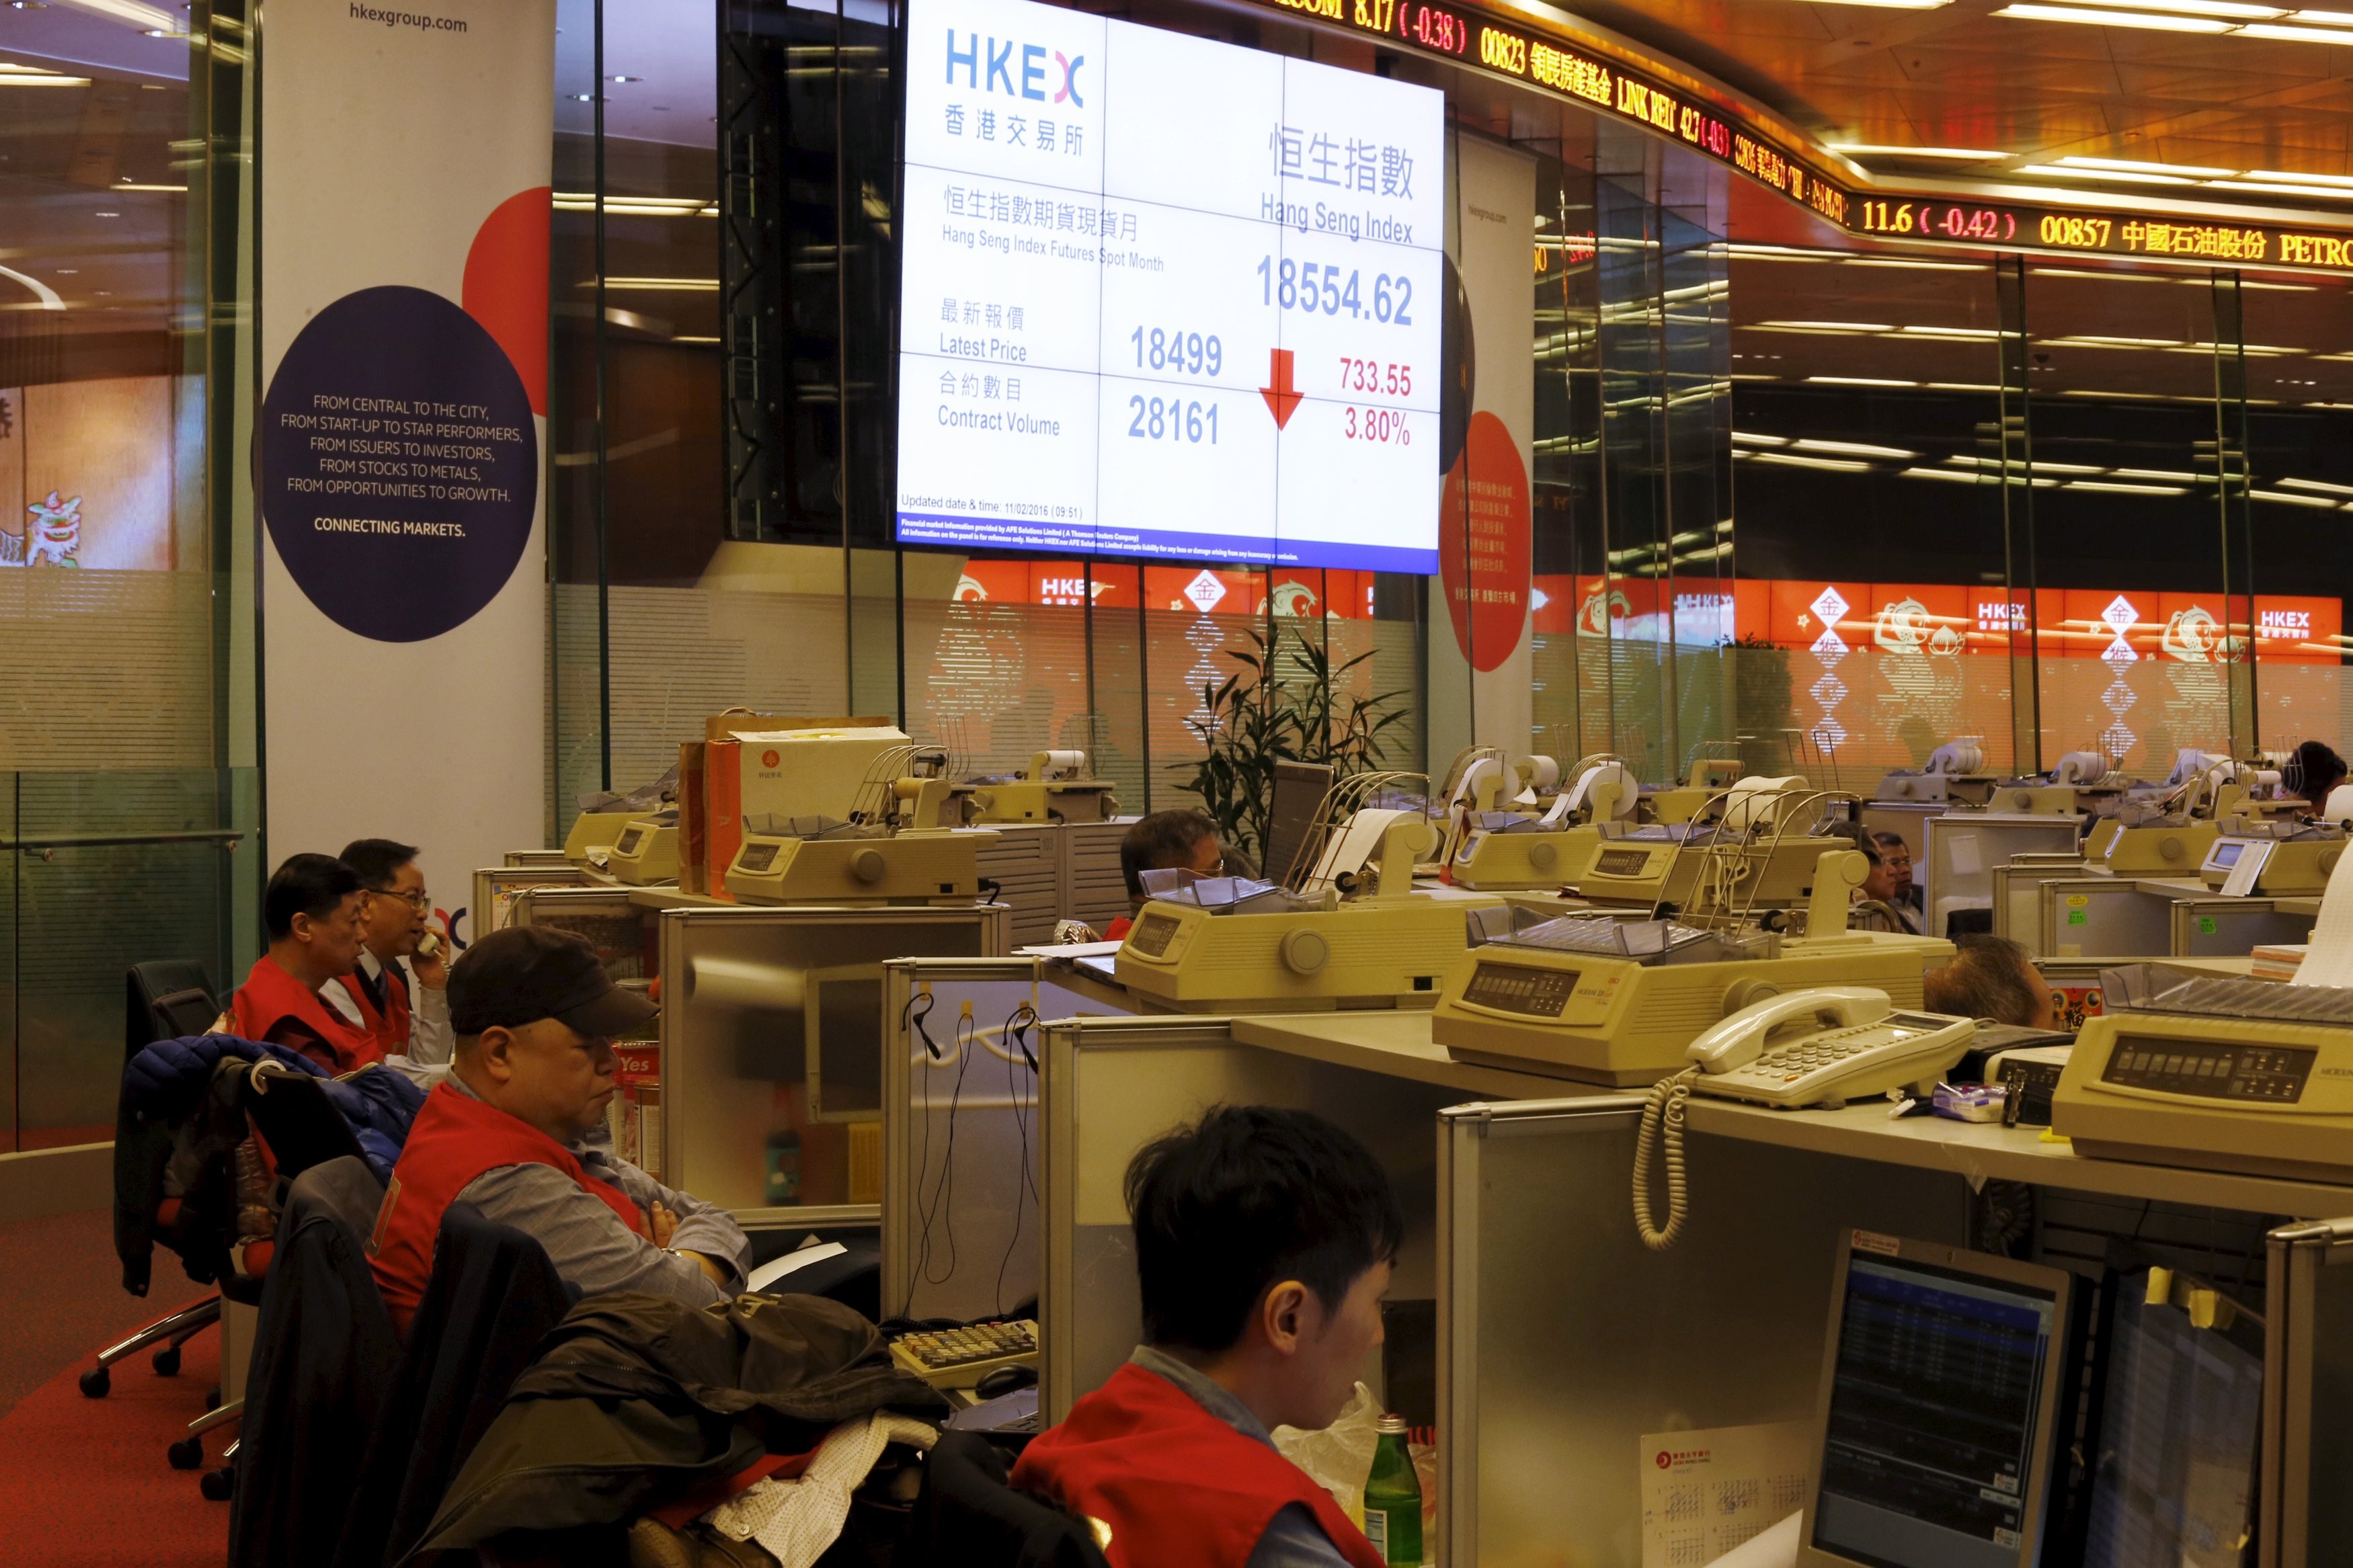 A display board shows the falling Hang Seng Index during morning trading on the first day of trading after Lunar New Year holidays at the Hong Kong Stocks Exchange in Hong Kong, China February 11, 2016. Photo: REUTERS